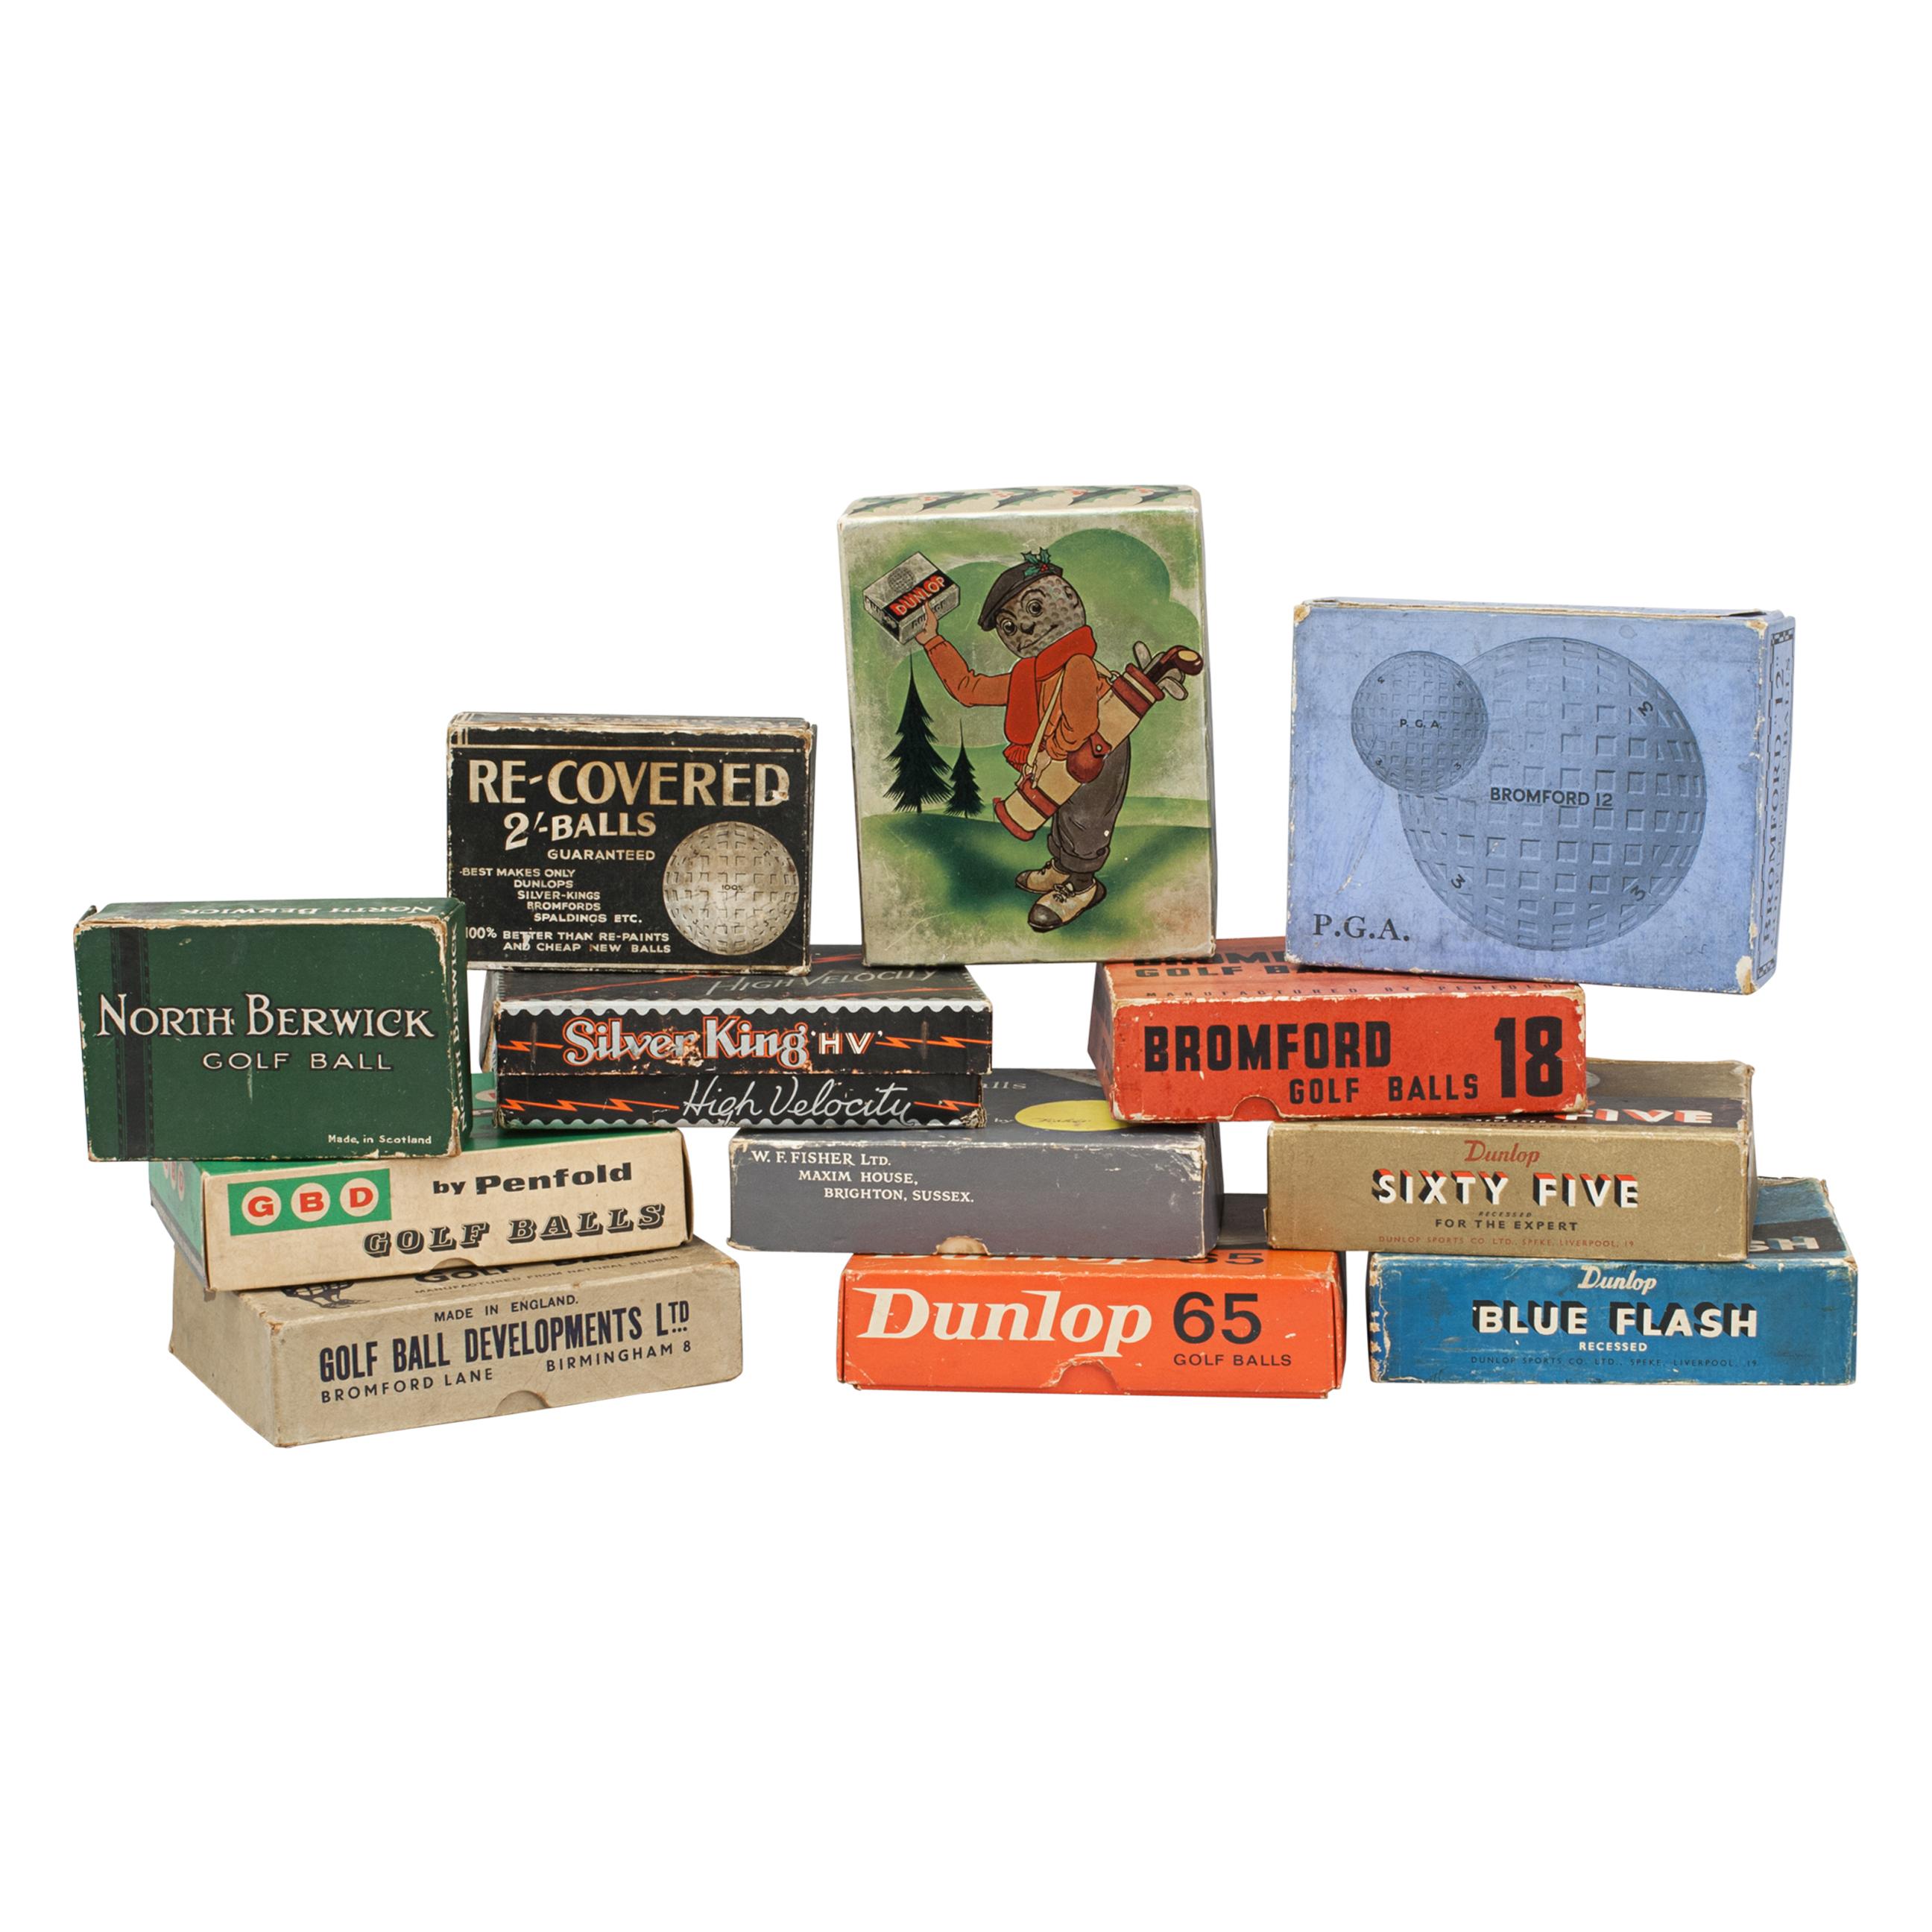 Collection Of Vintage Cardboard Golf Ball Boxes.
A very nice decorative collection of twelve cardboard golf ball boxes. The boxes would have originally been sold complete with a dozen, or half a dozen, of the relevant golf balls, but are now empty.